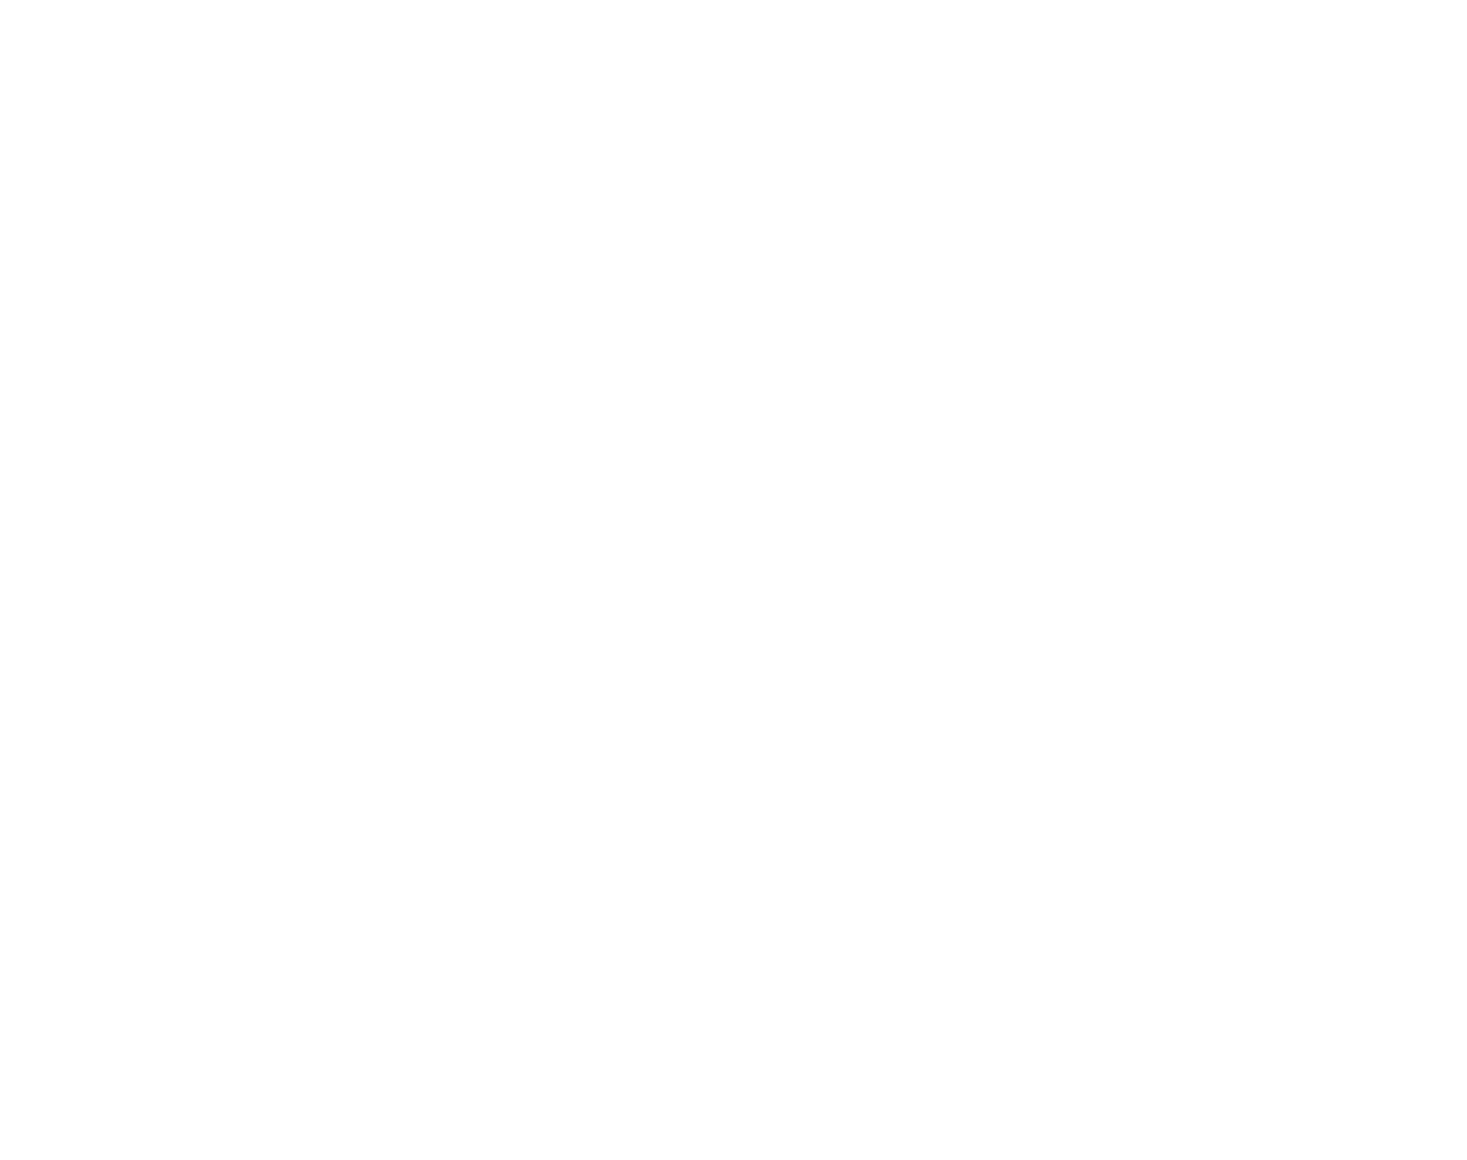 Hotel Quinta do Lago, a Leading Hotel of the World